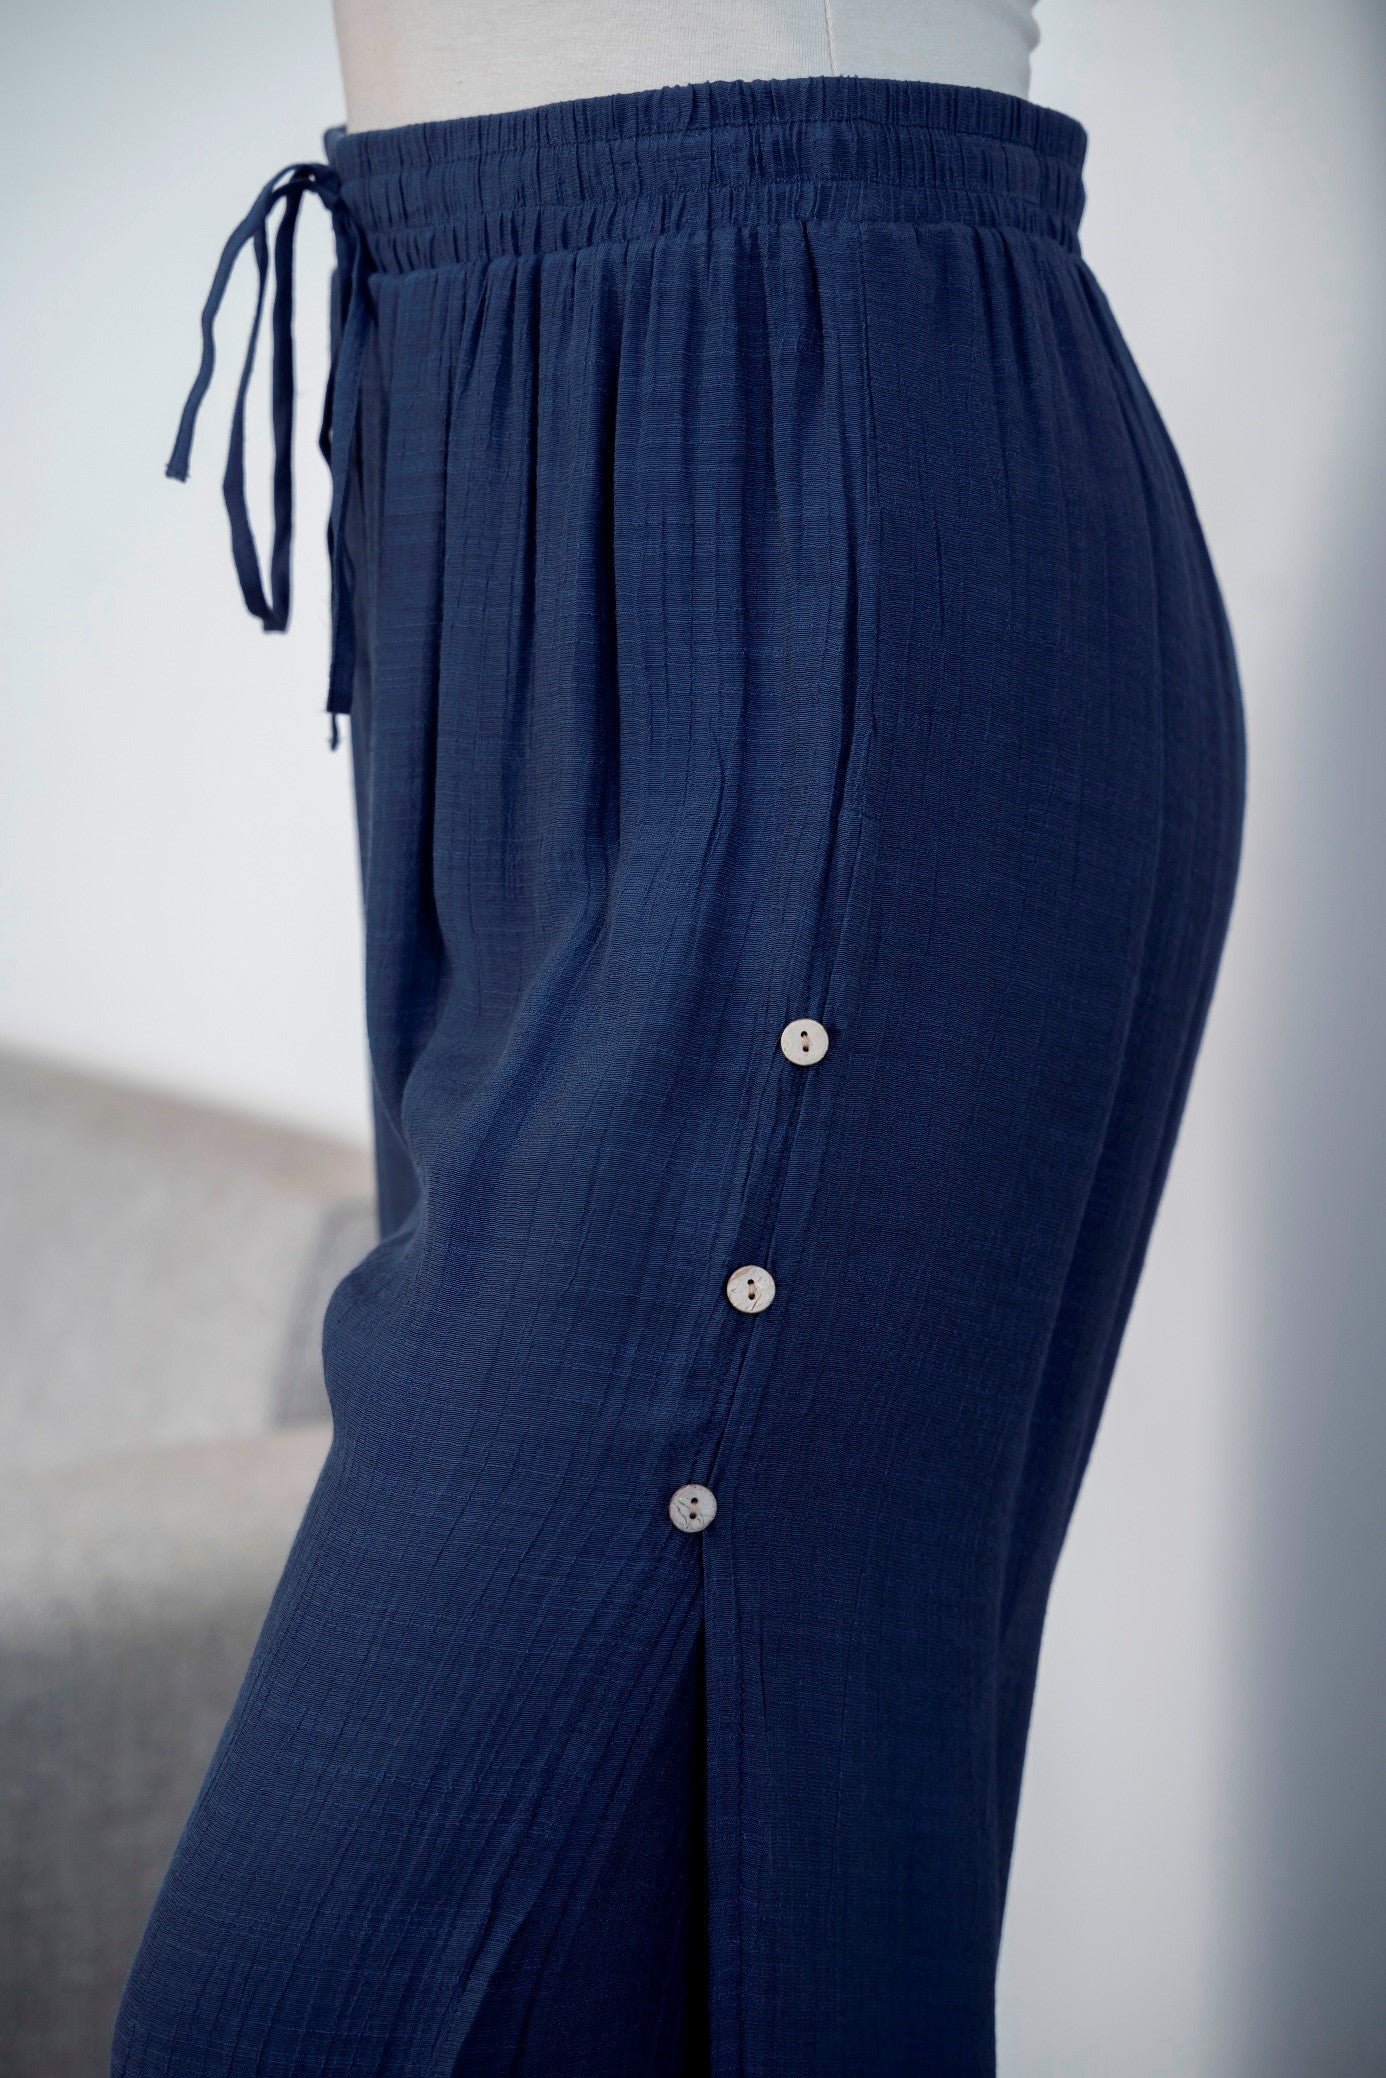 3/4 length loose capri trousers with tie on waist in navy blue color with three buttons on the side